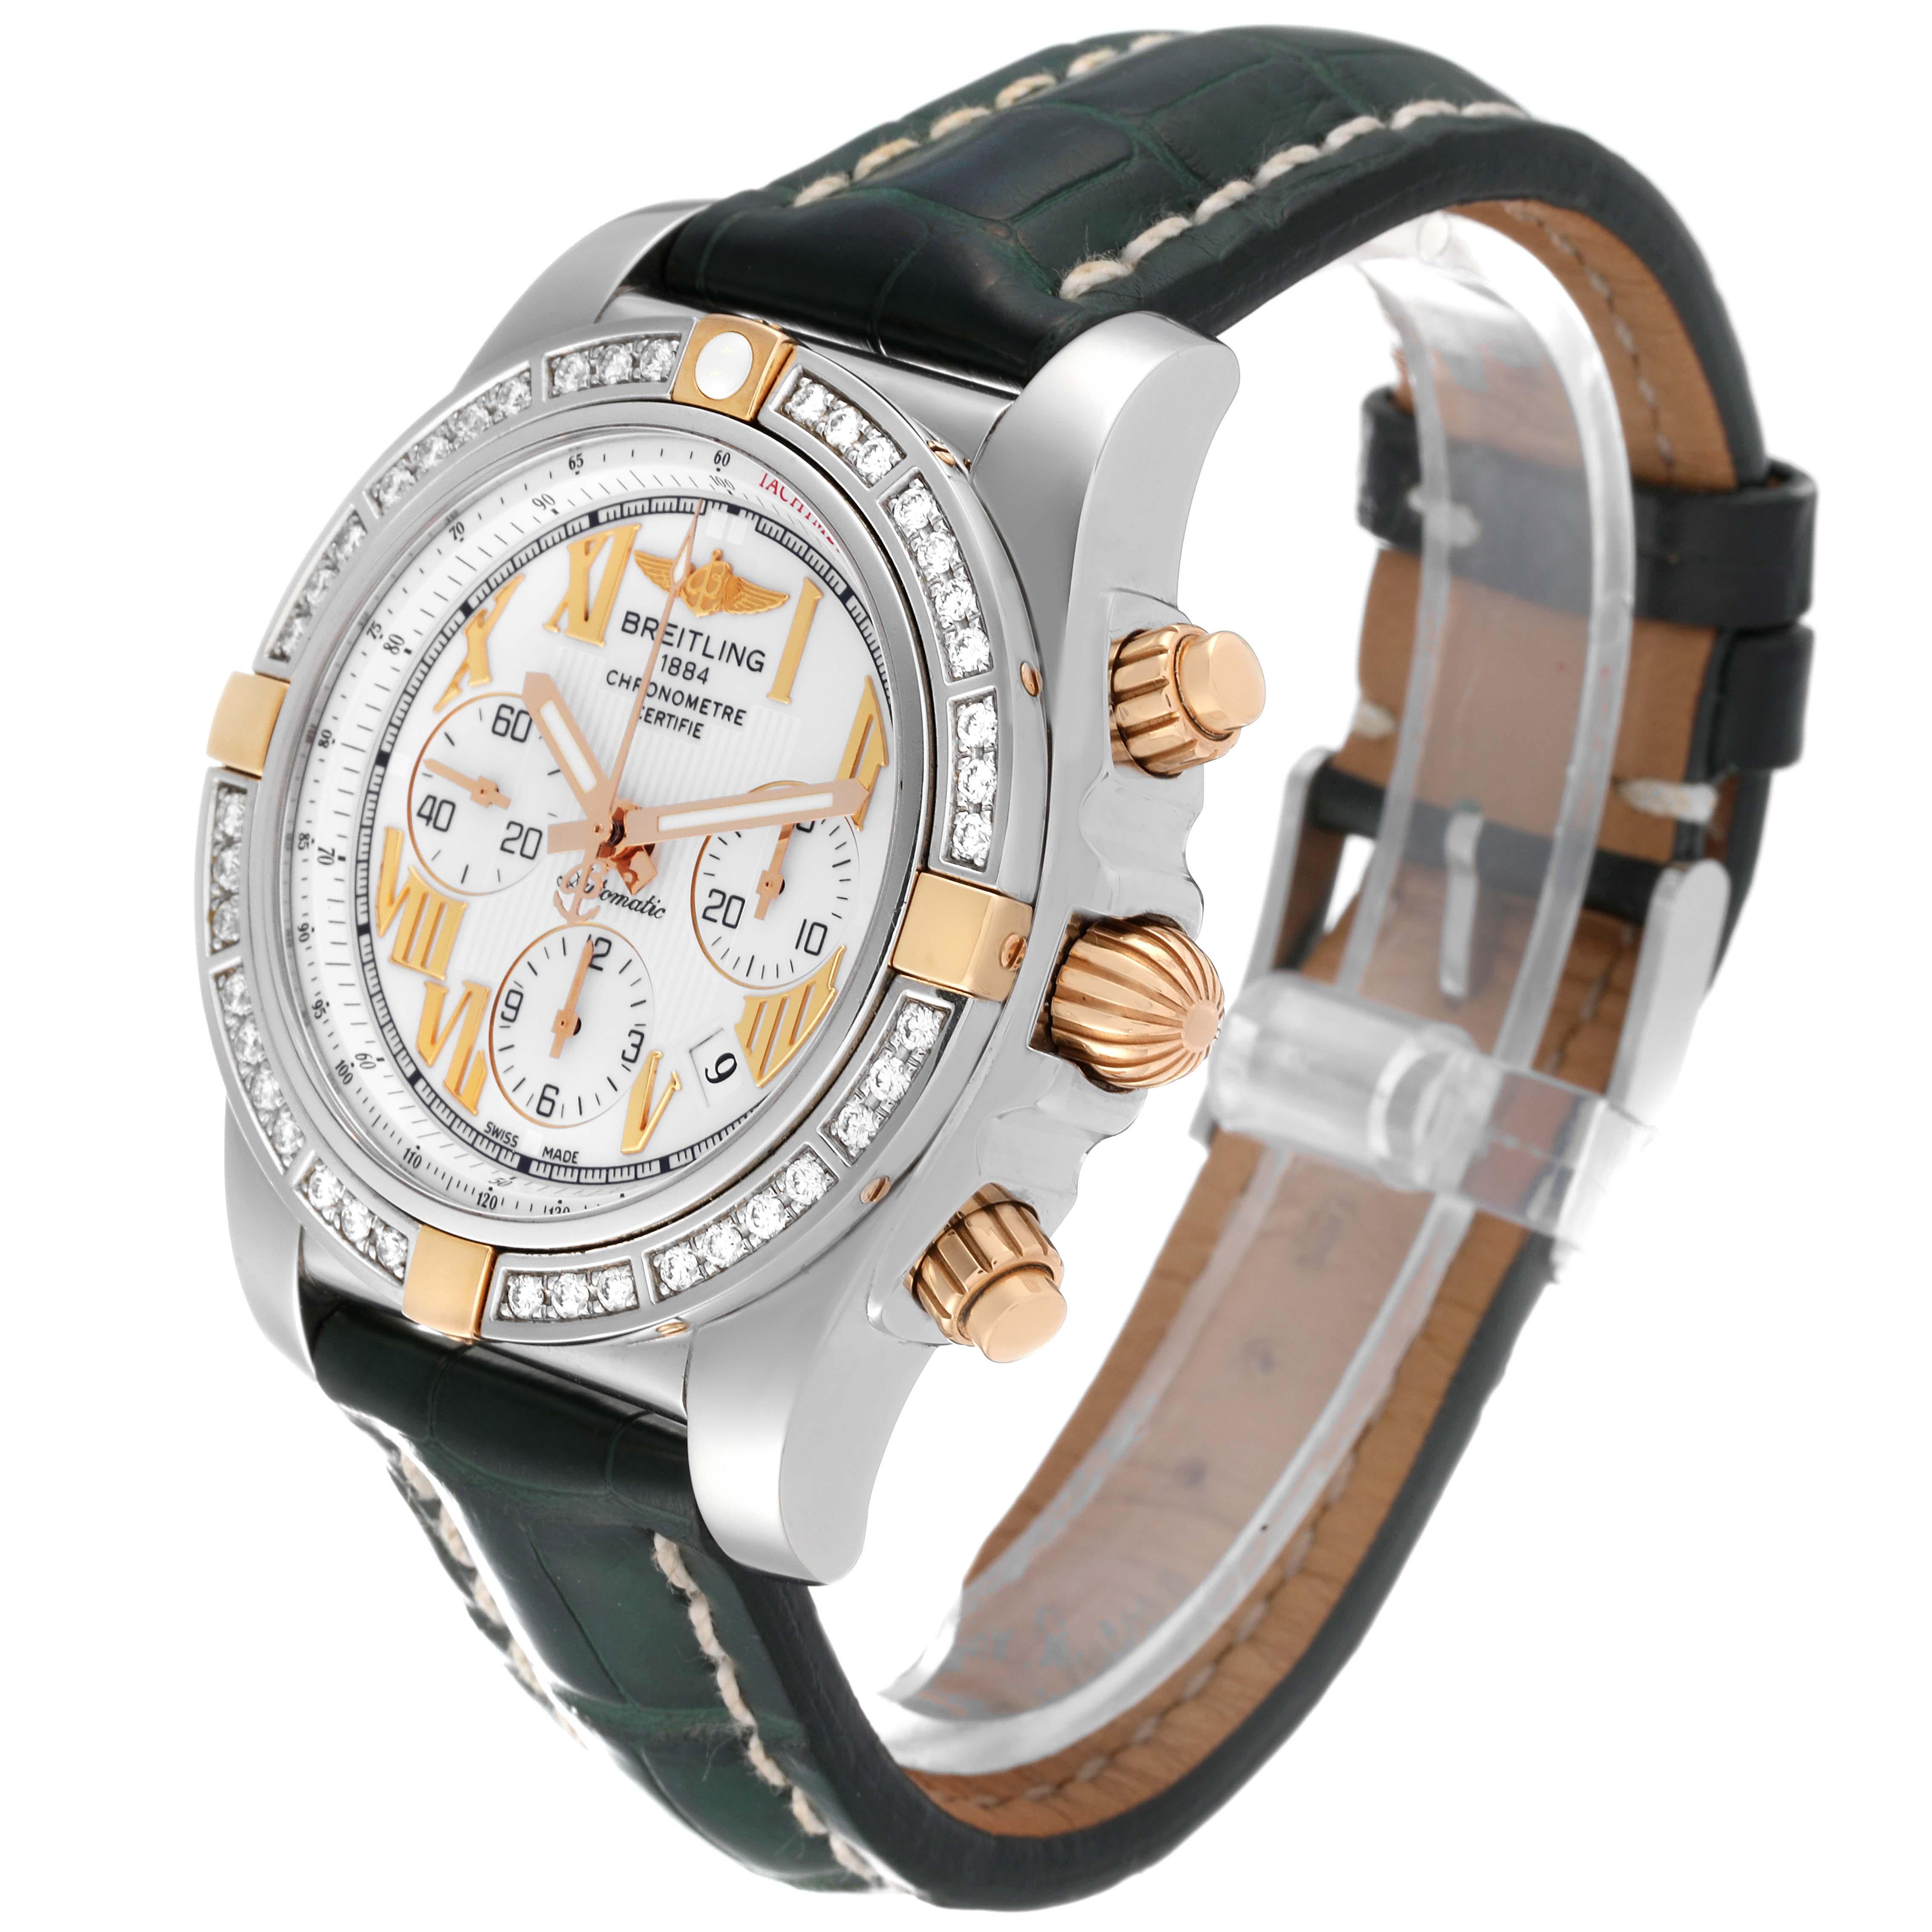 Breitling Chronomat White Dial Steel Rose Gold Diamond Mens Watch IB0110 In Excellent Condition For Sale In Atlanta, GA